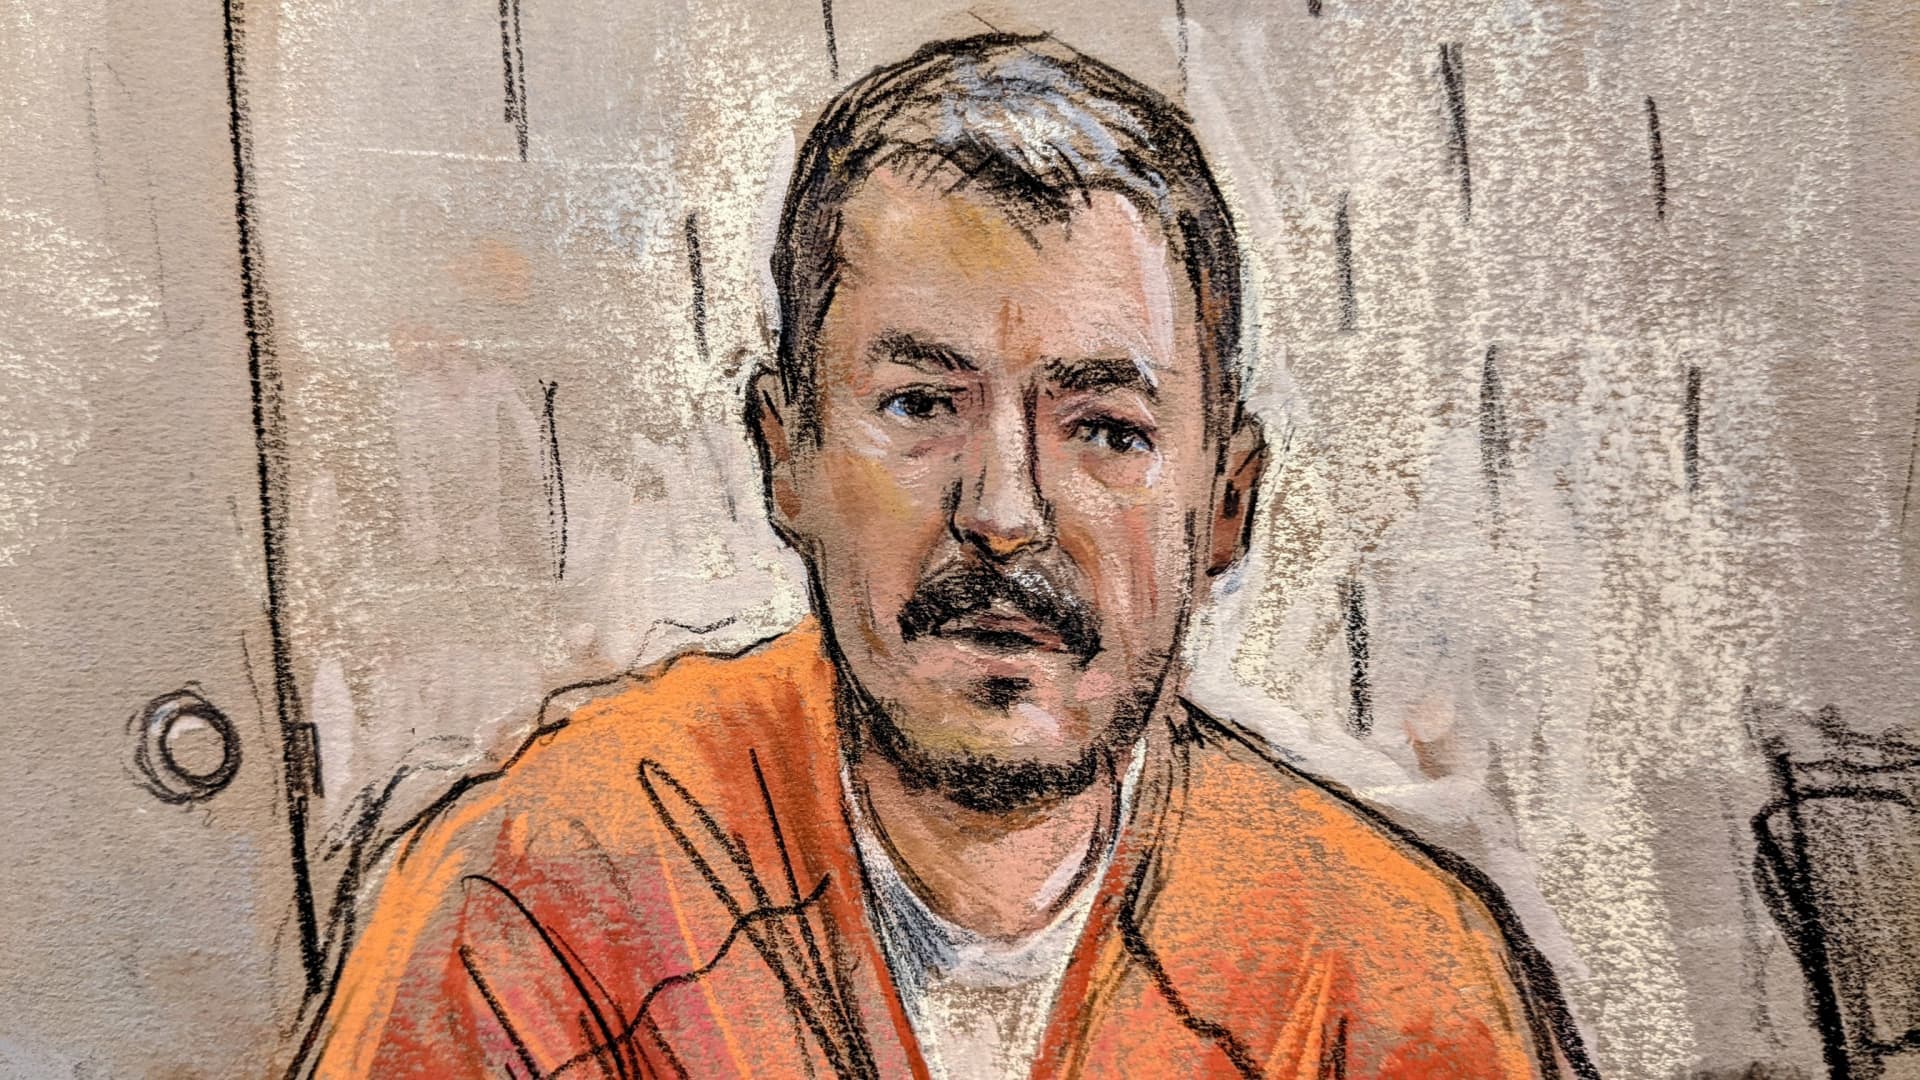 Arian Taherzadeh, sketch from detention hearing for the two men charged with impersonating DHS agents.